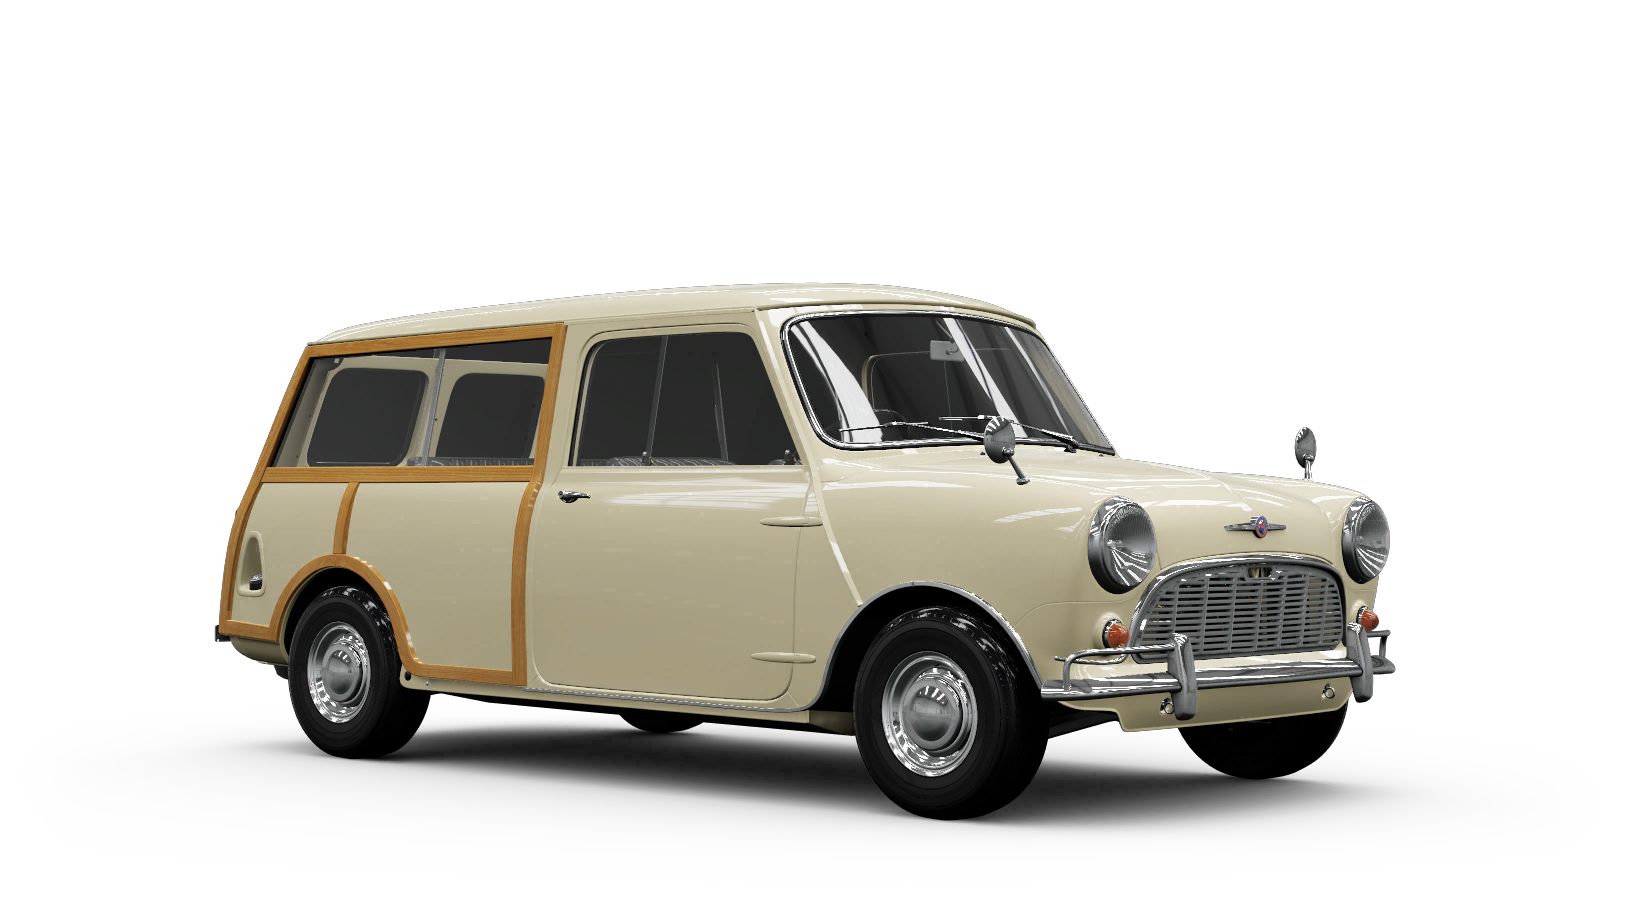 https://static.wikia.nocookie.net/forzamotorsport/images/5/53/HOR_XB1_Morris_Mini-Traveller.png/revision/latest?cb=20191014201049